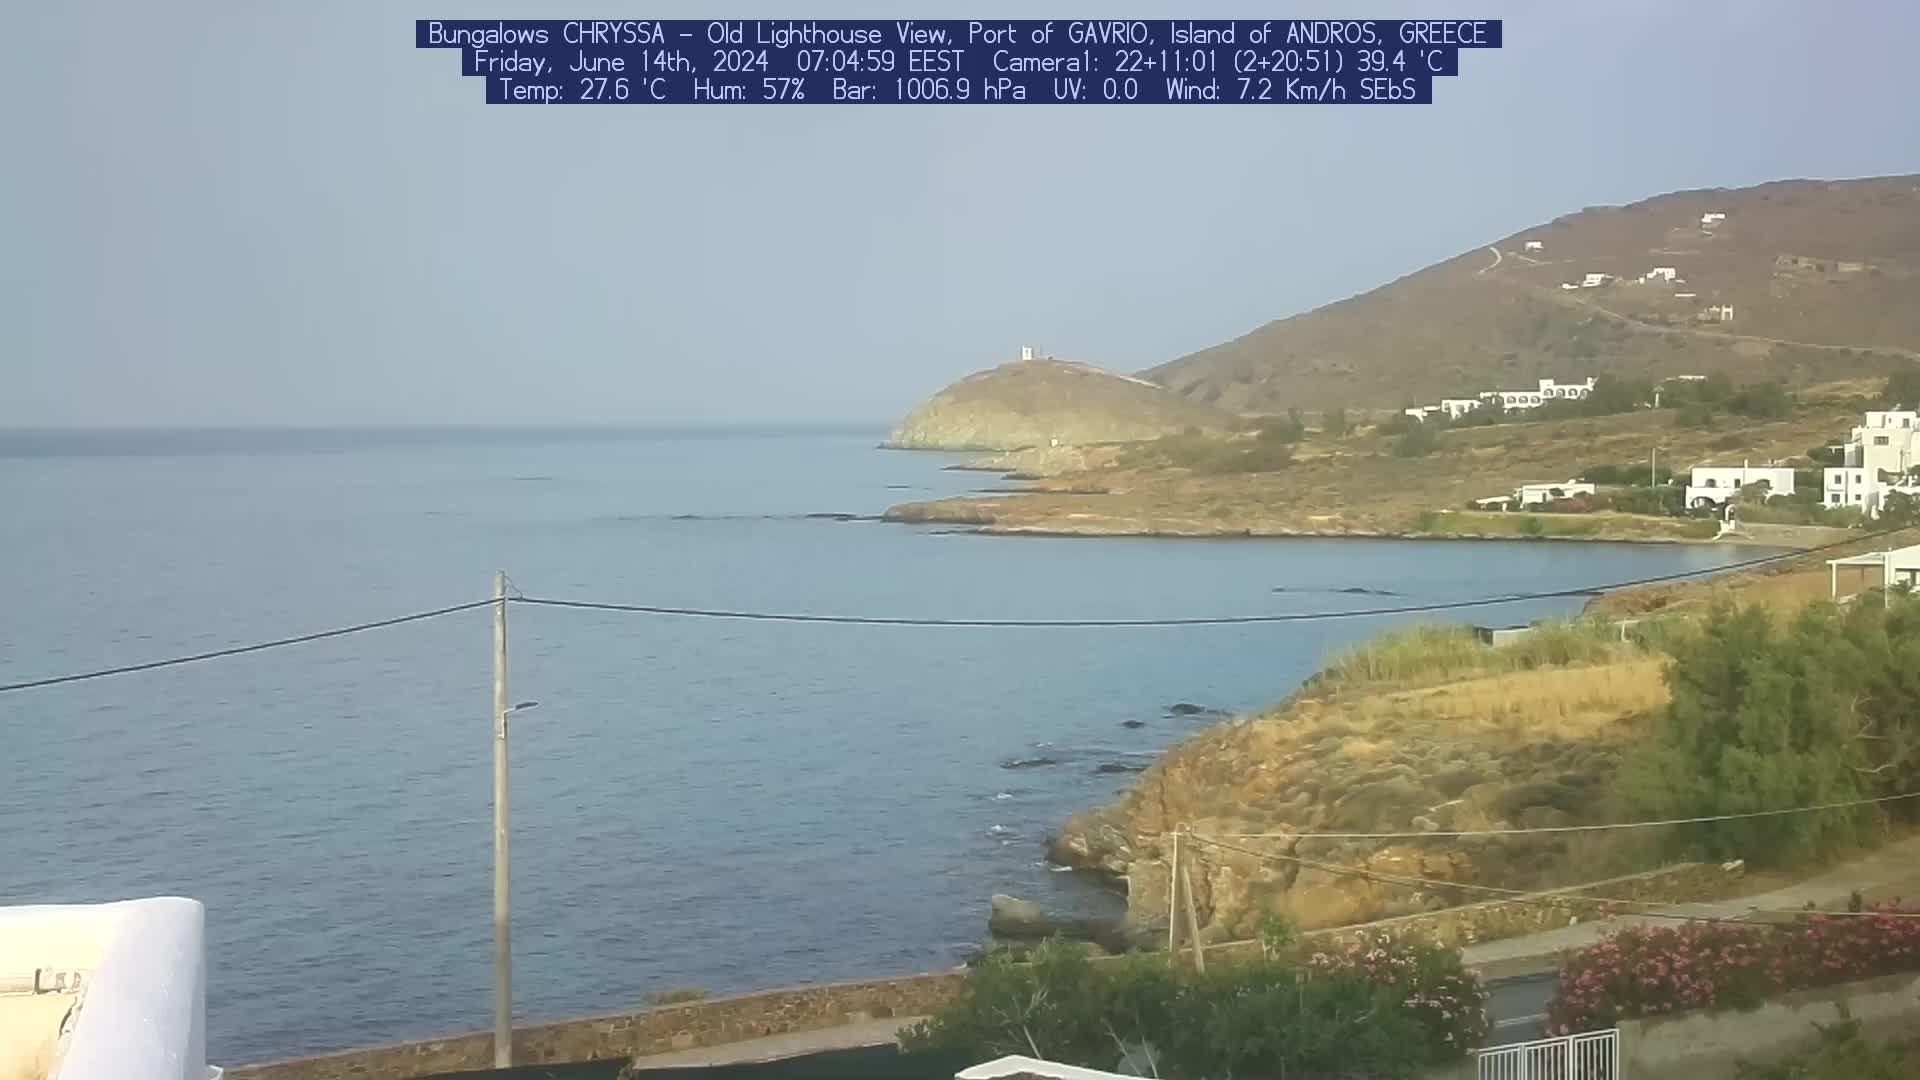 Andros - Gavrion Mar. 07:05